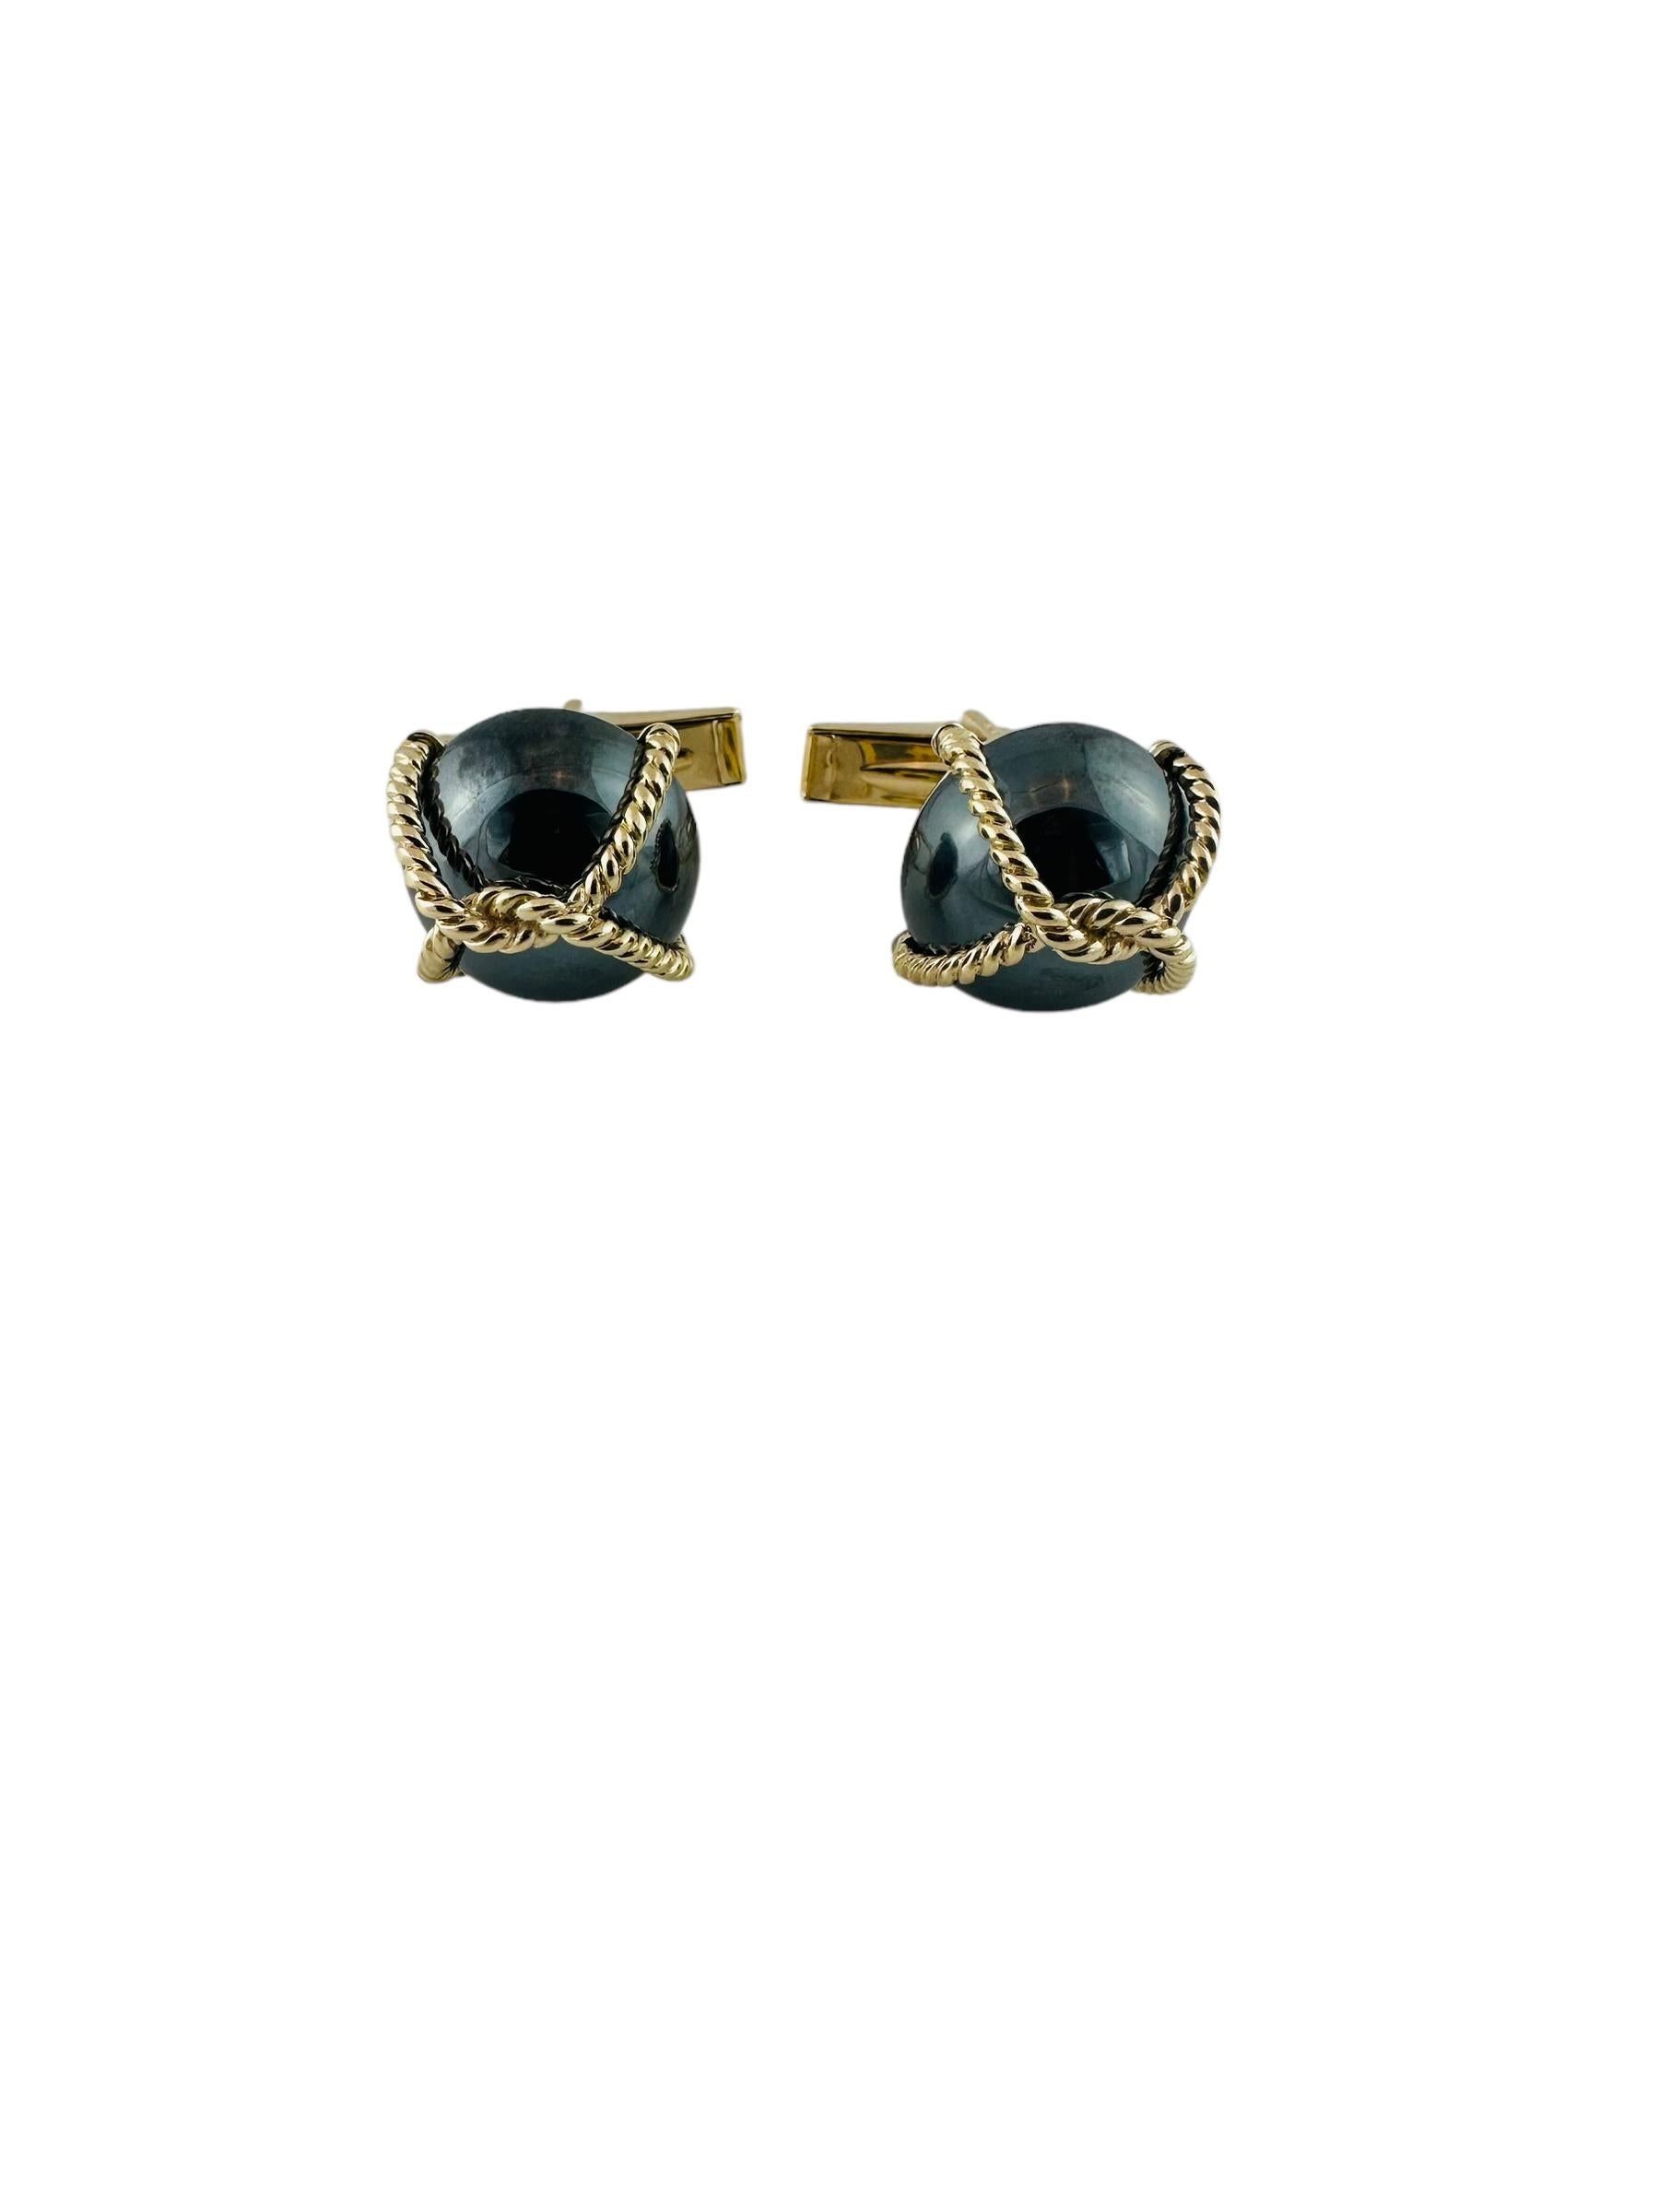 Vintage Tiffany & Co. 14K Yellow Gold Hematite Cable Cufflinks For Sale 2